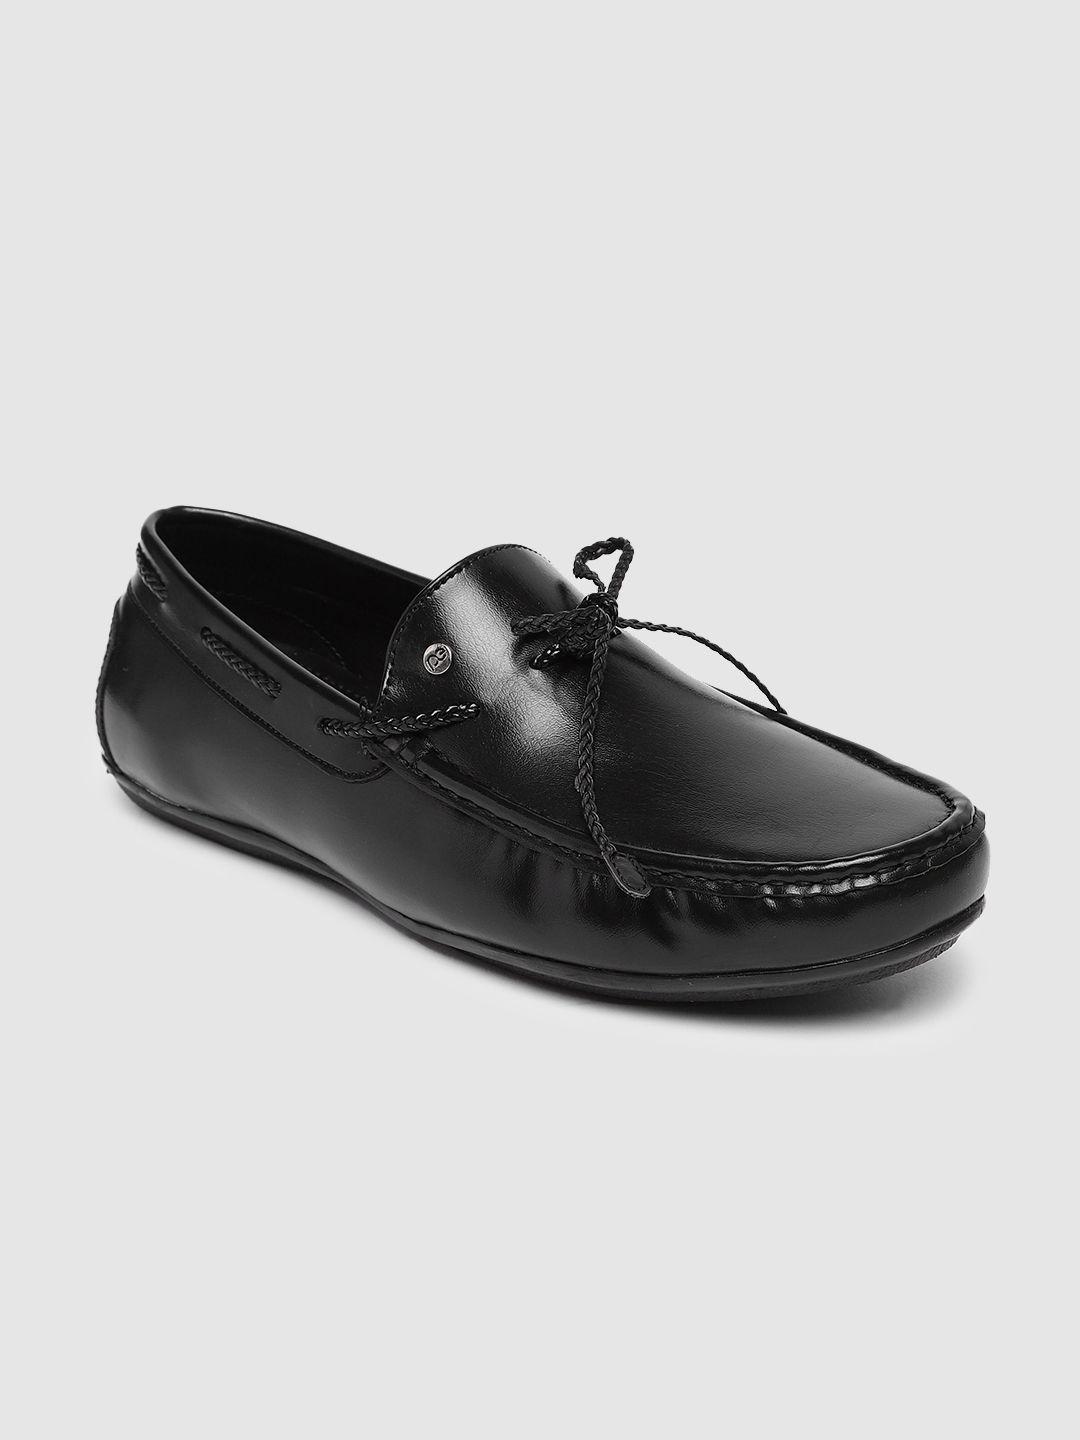 peter england men solid boat shoes